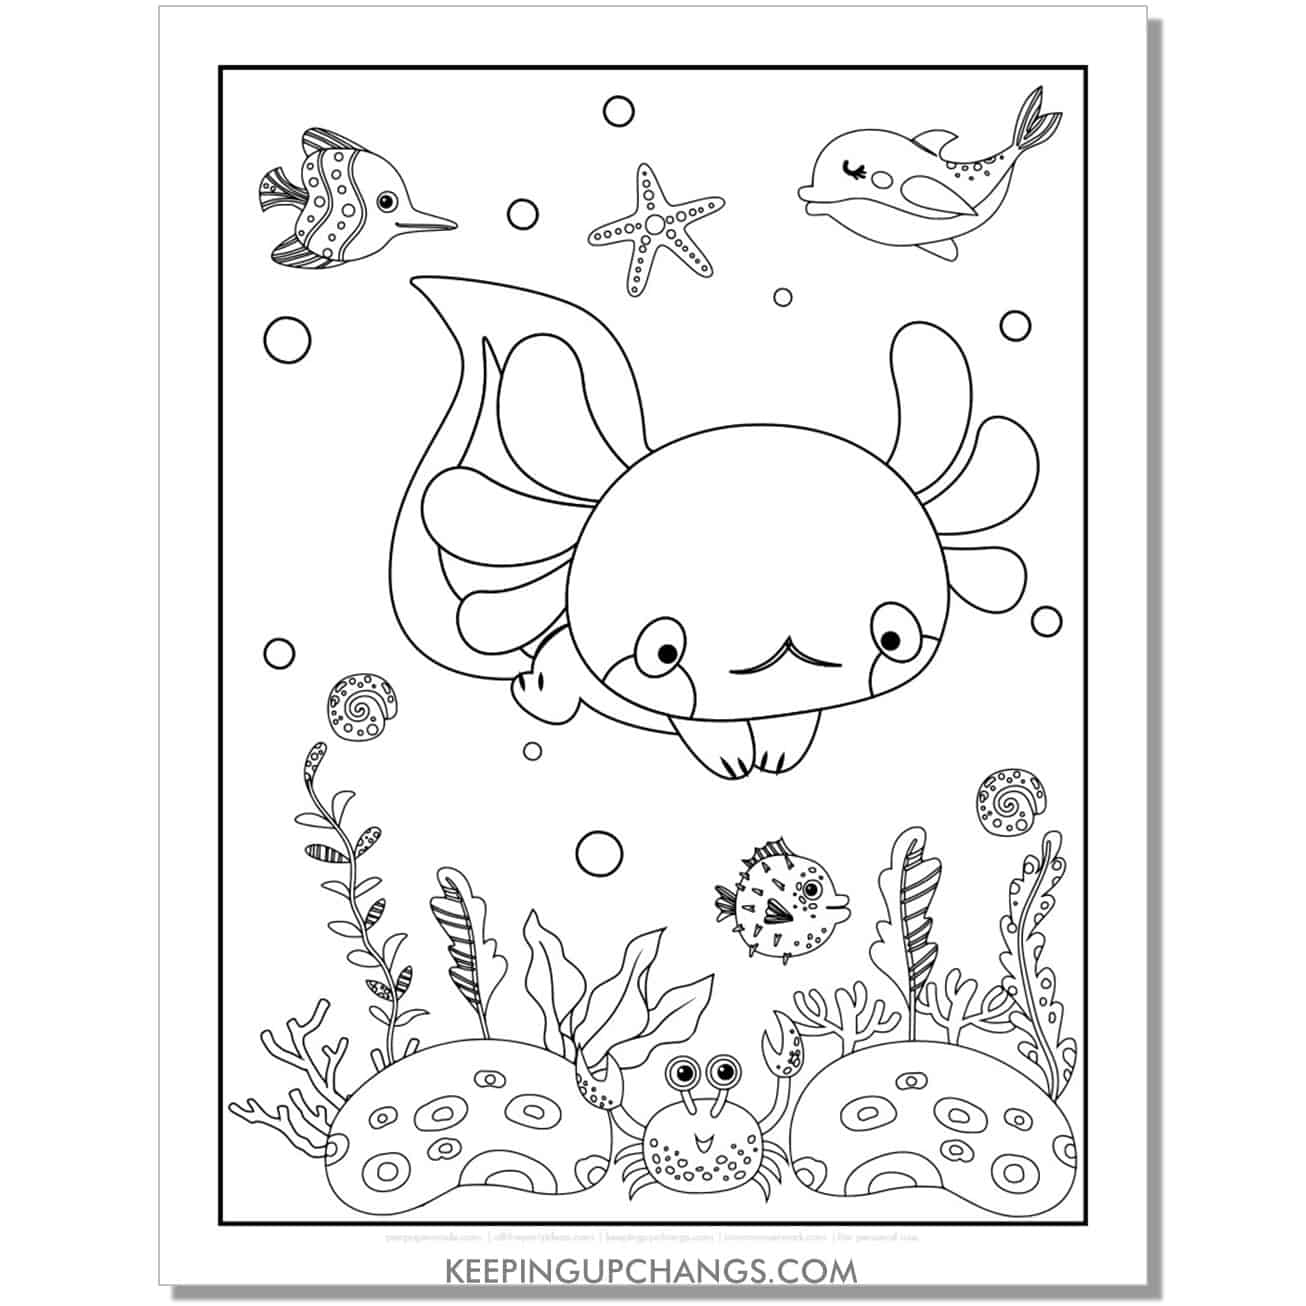 free swimming axolotl coloring page, colouring sheet with pufferfish, dolphin crab.